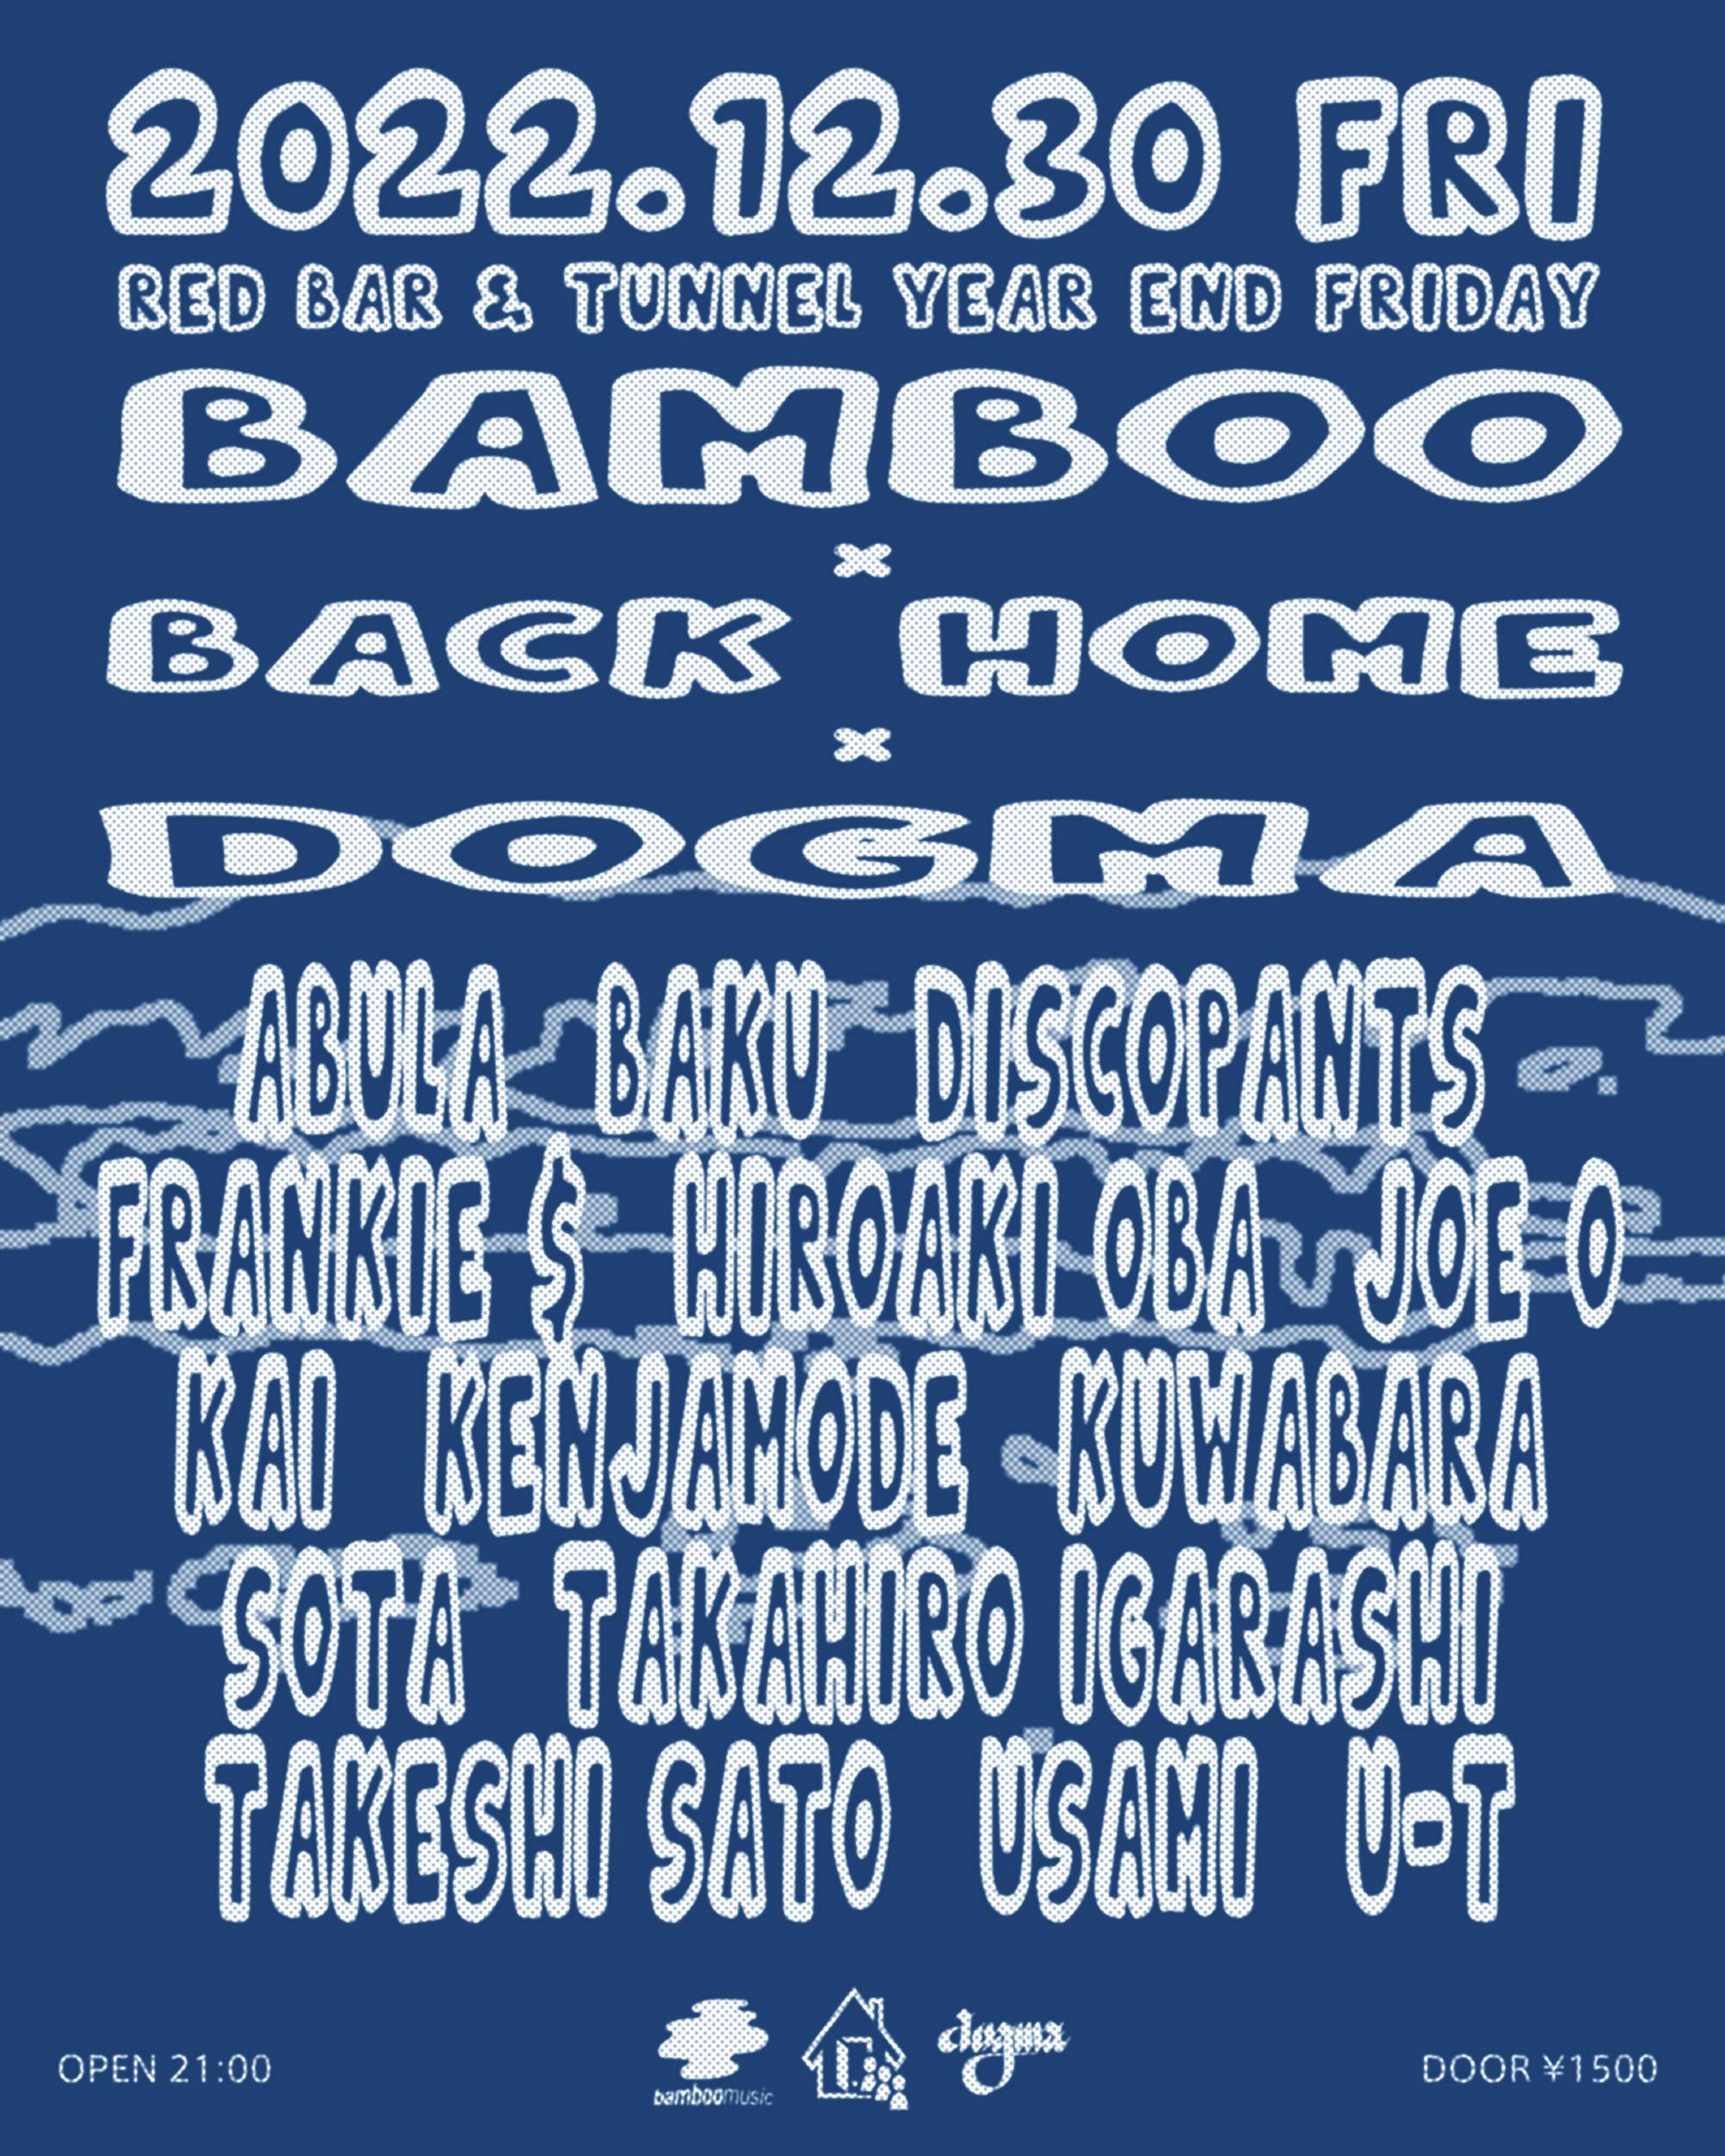 Red Bar & TUNNEL YEAR END FRIDAY -bamboo × Back Home × dogma- - Página frontal